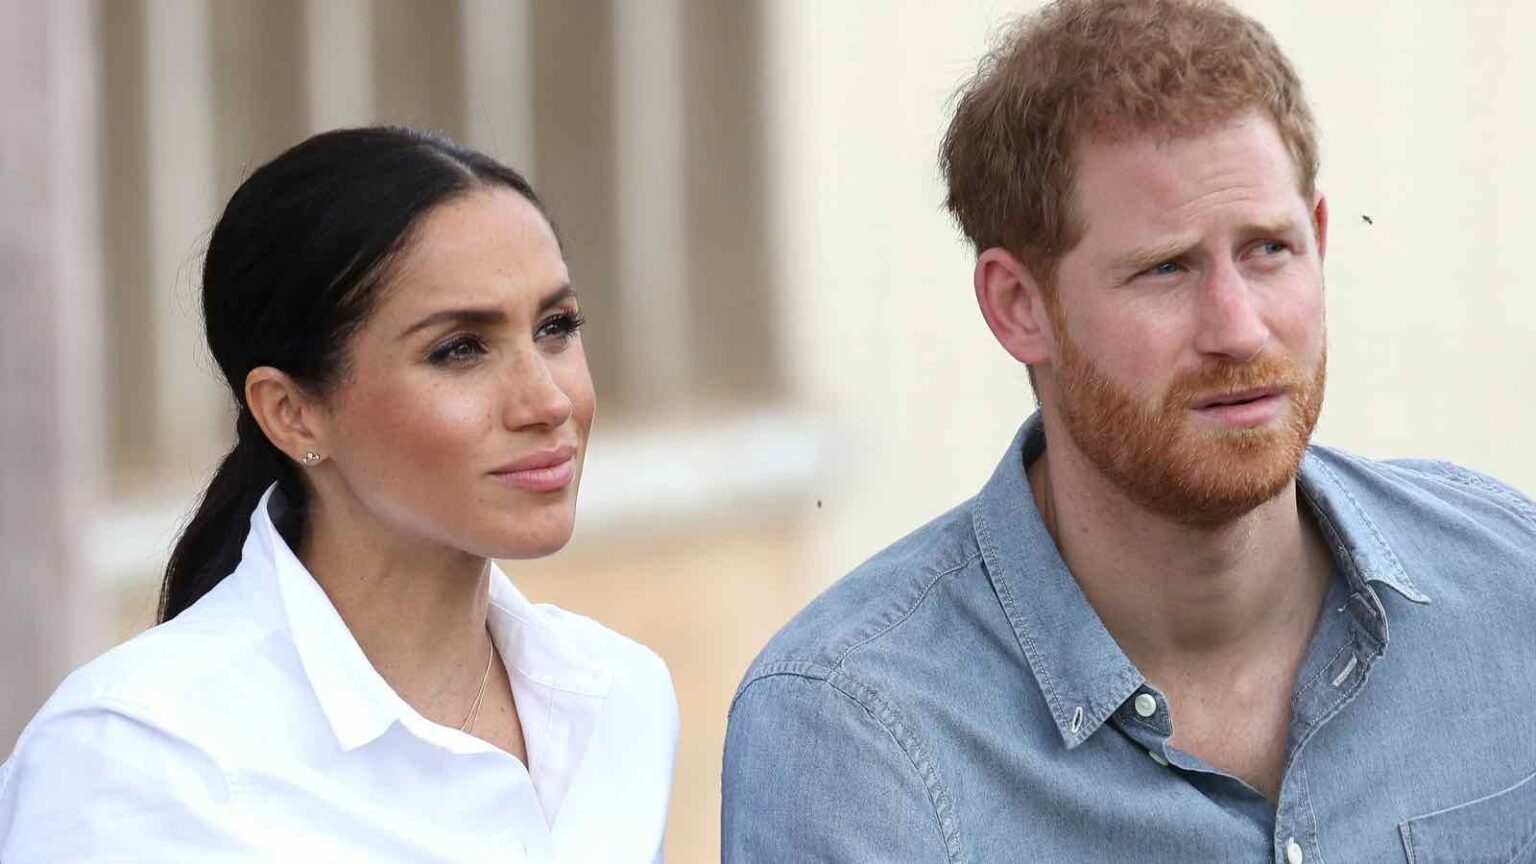 Breaking news: people who are famous leave their house. But why is it news Prince Harry and Meghan Markle took a walk? See the stupid news for yourself.